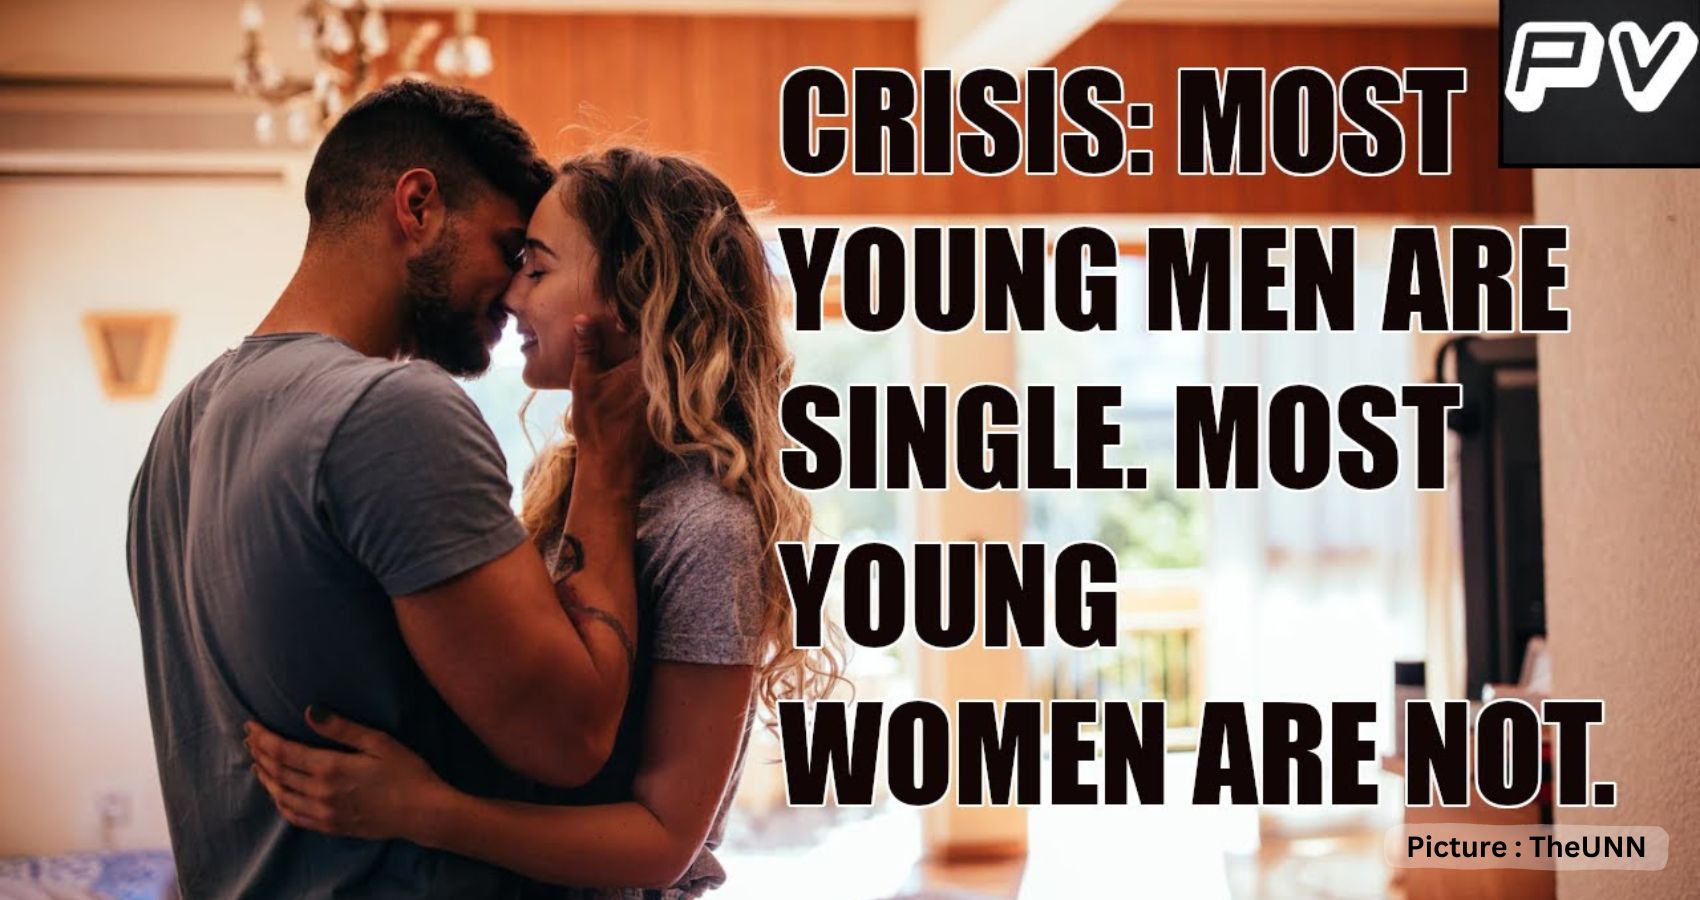 Most Young Men Are Single. Most Young Women Are Not